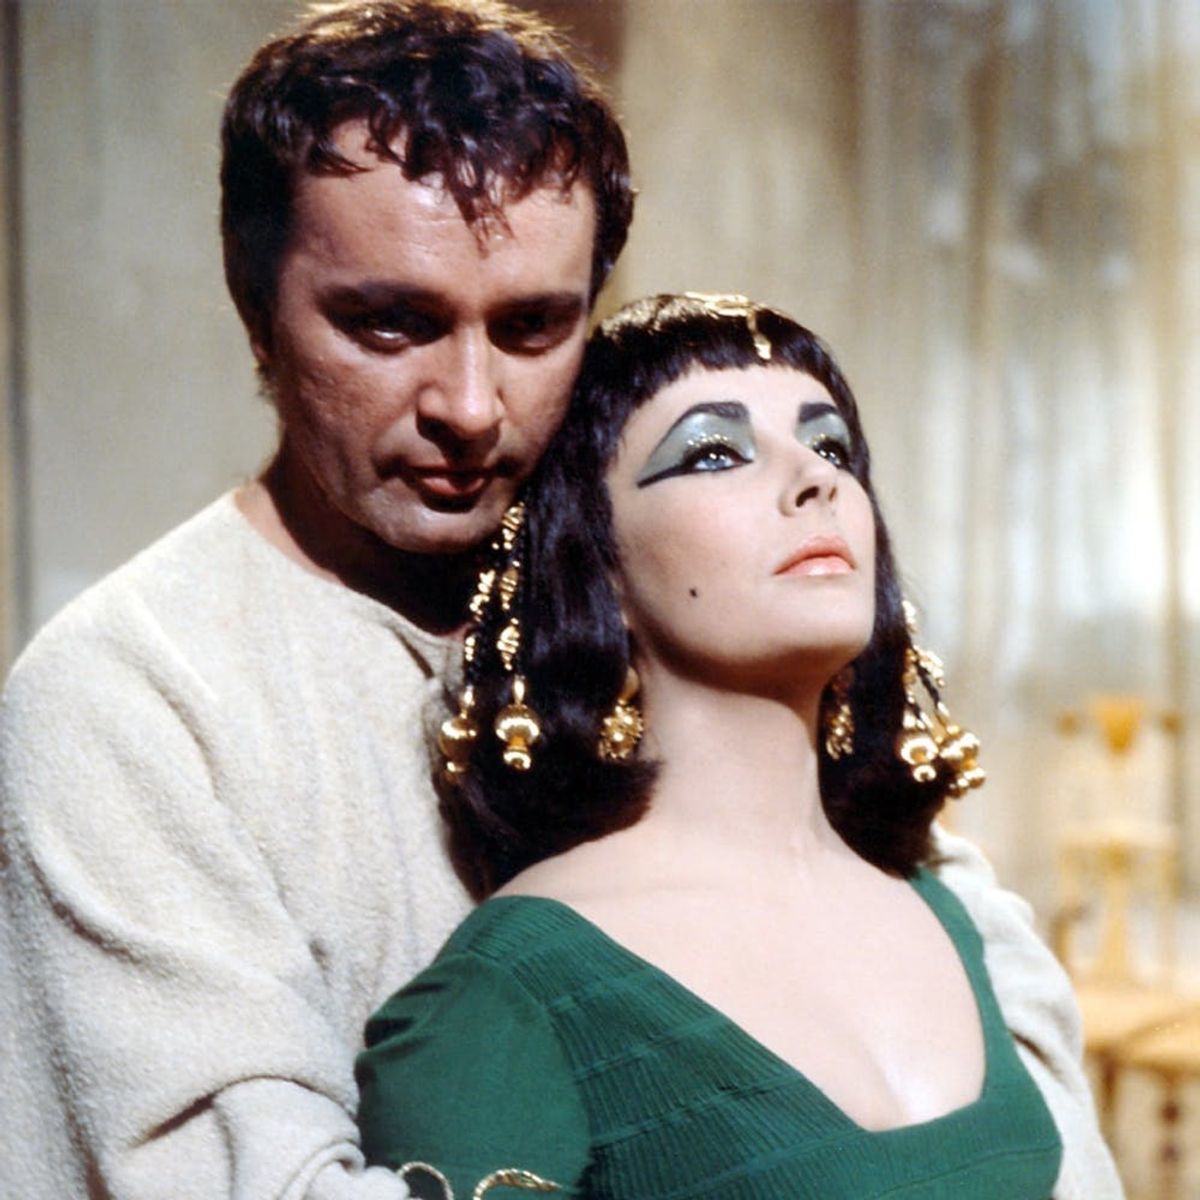 Elizabeth Taylor Was a Great Actress but an Even Better Negotiator